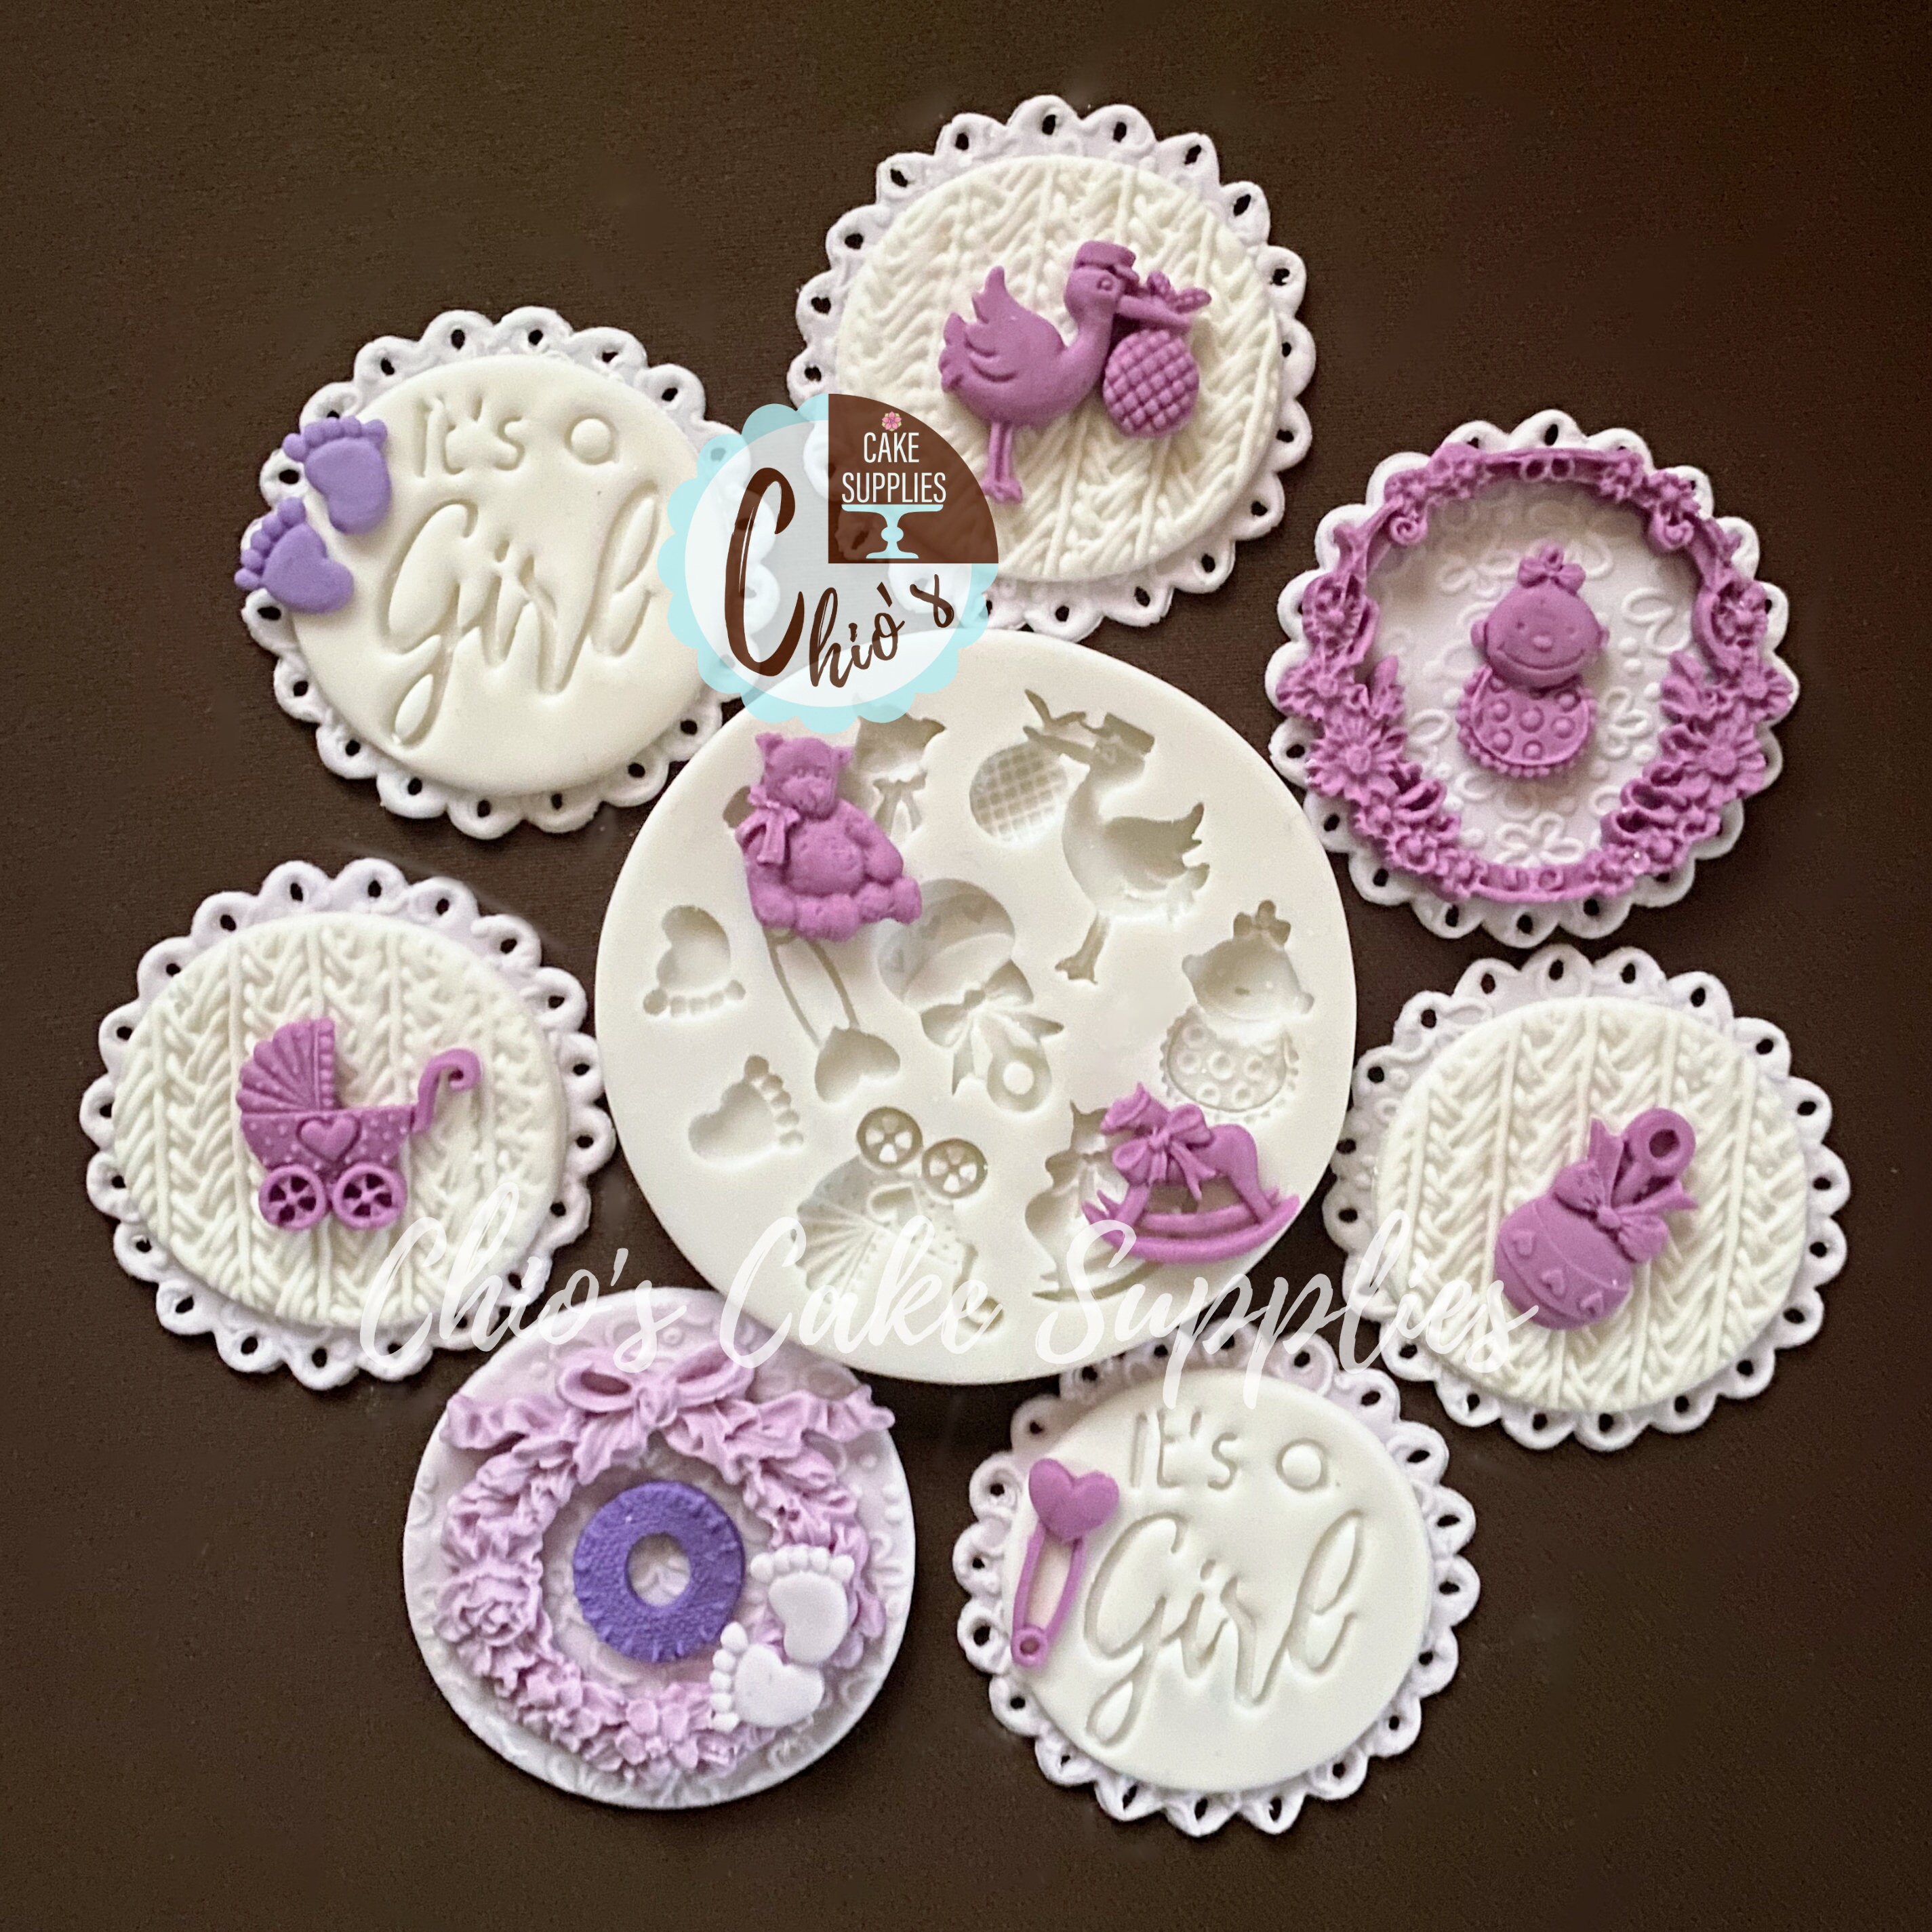 Baby Shower - Molds - Baking Supplies, Party Supplies, Decorations, Costumes, New York